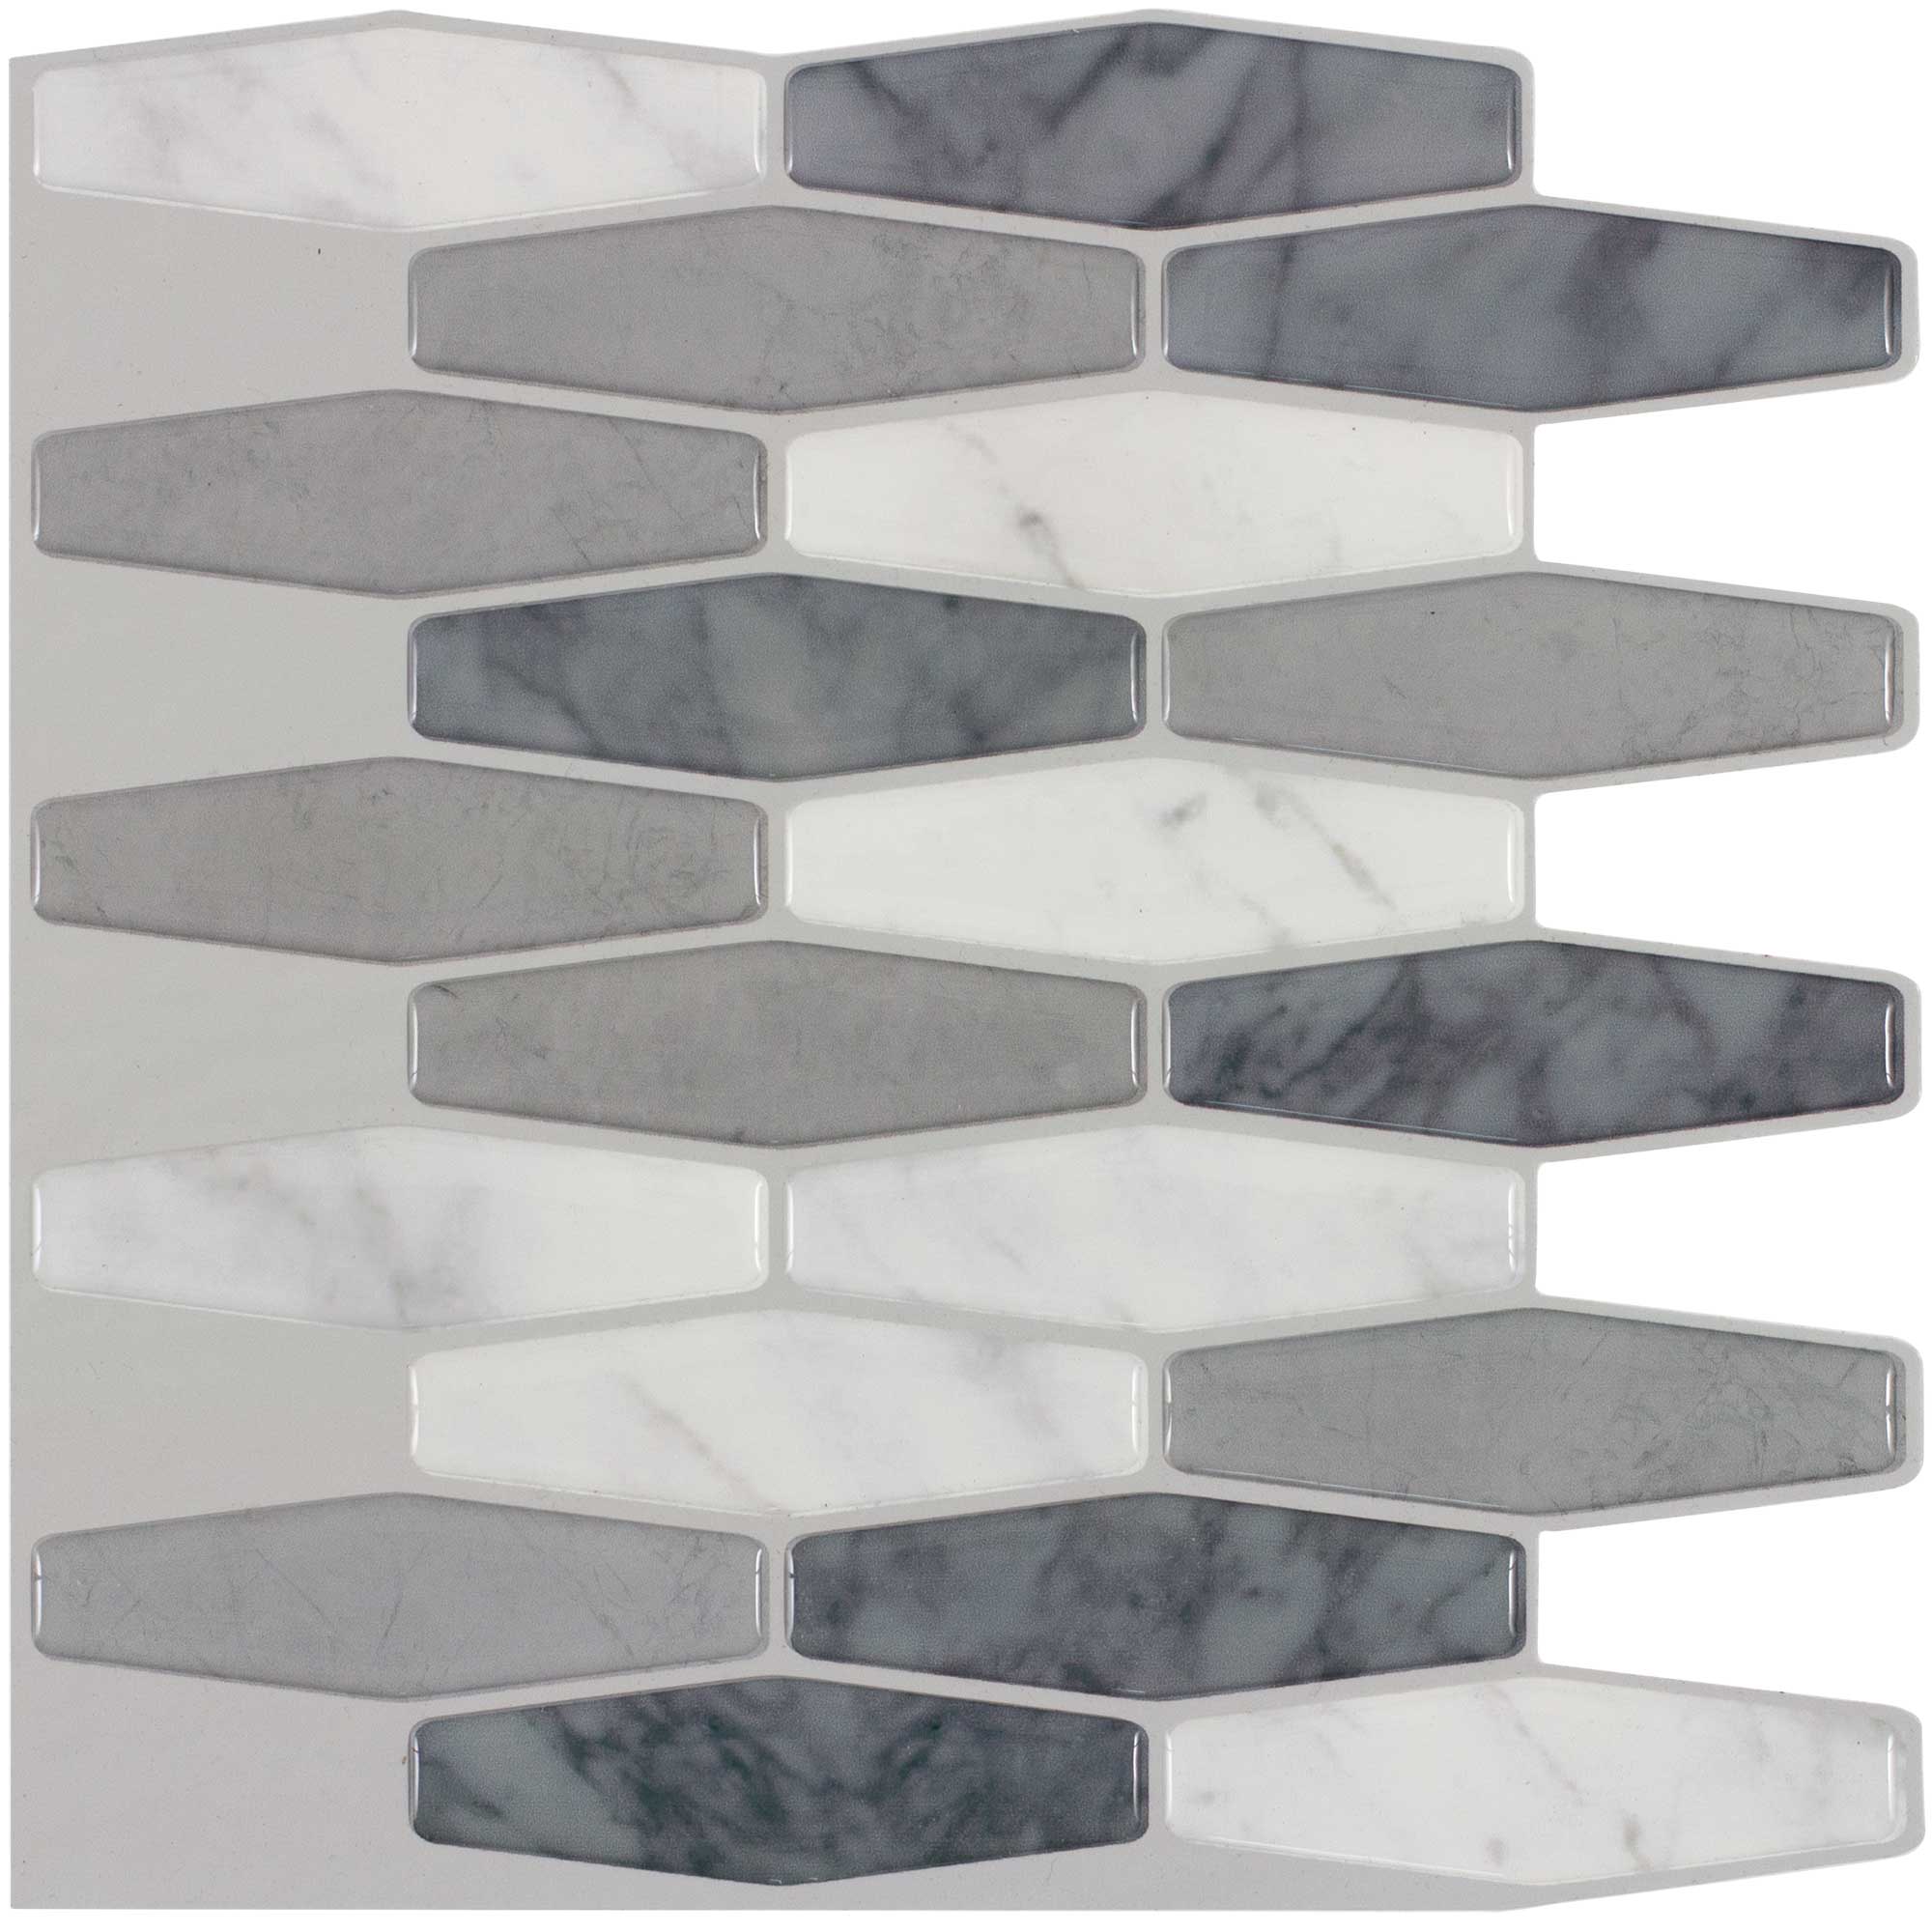 10 PCS Peel and Stick Floor Tile White and Grey Marble Look Self